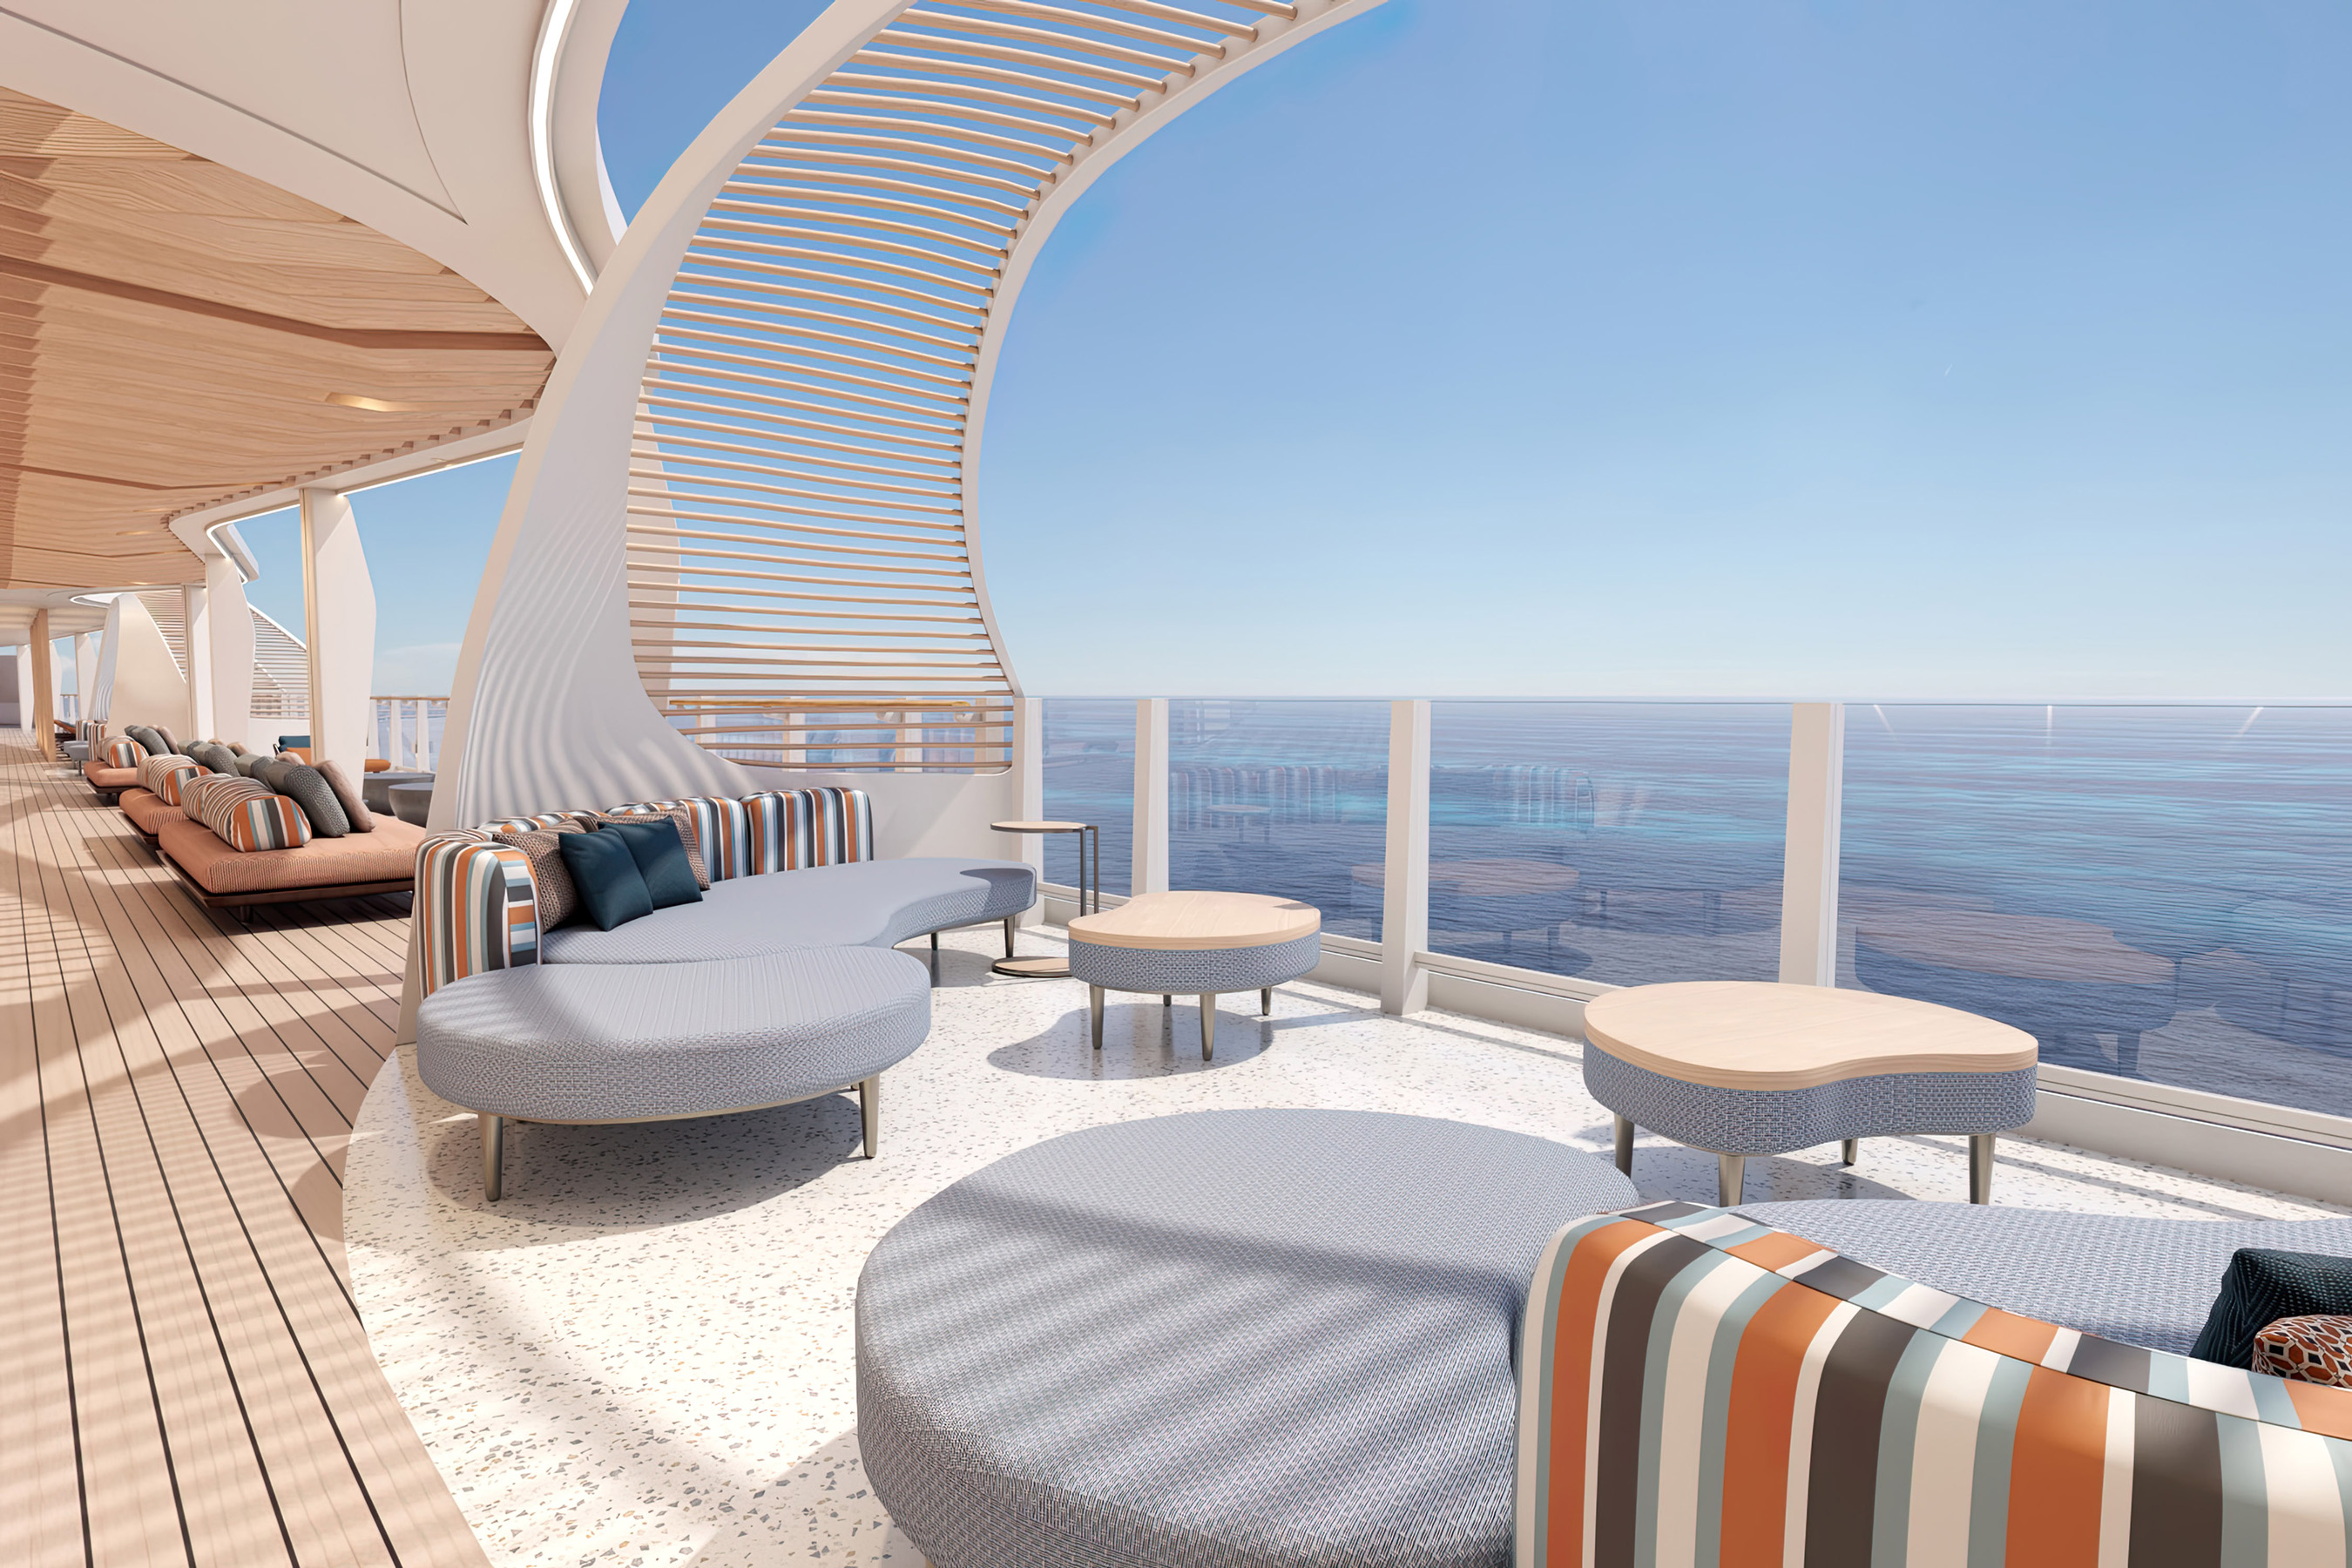 On board Norwegian Cruise Line’s newest ship Norwegian Aqua, La Terrazza is a perfect outdoor lounge hideaway to unwind and admire the breathtaking ocean views.